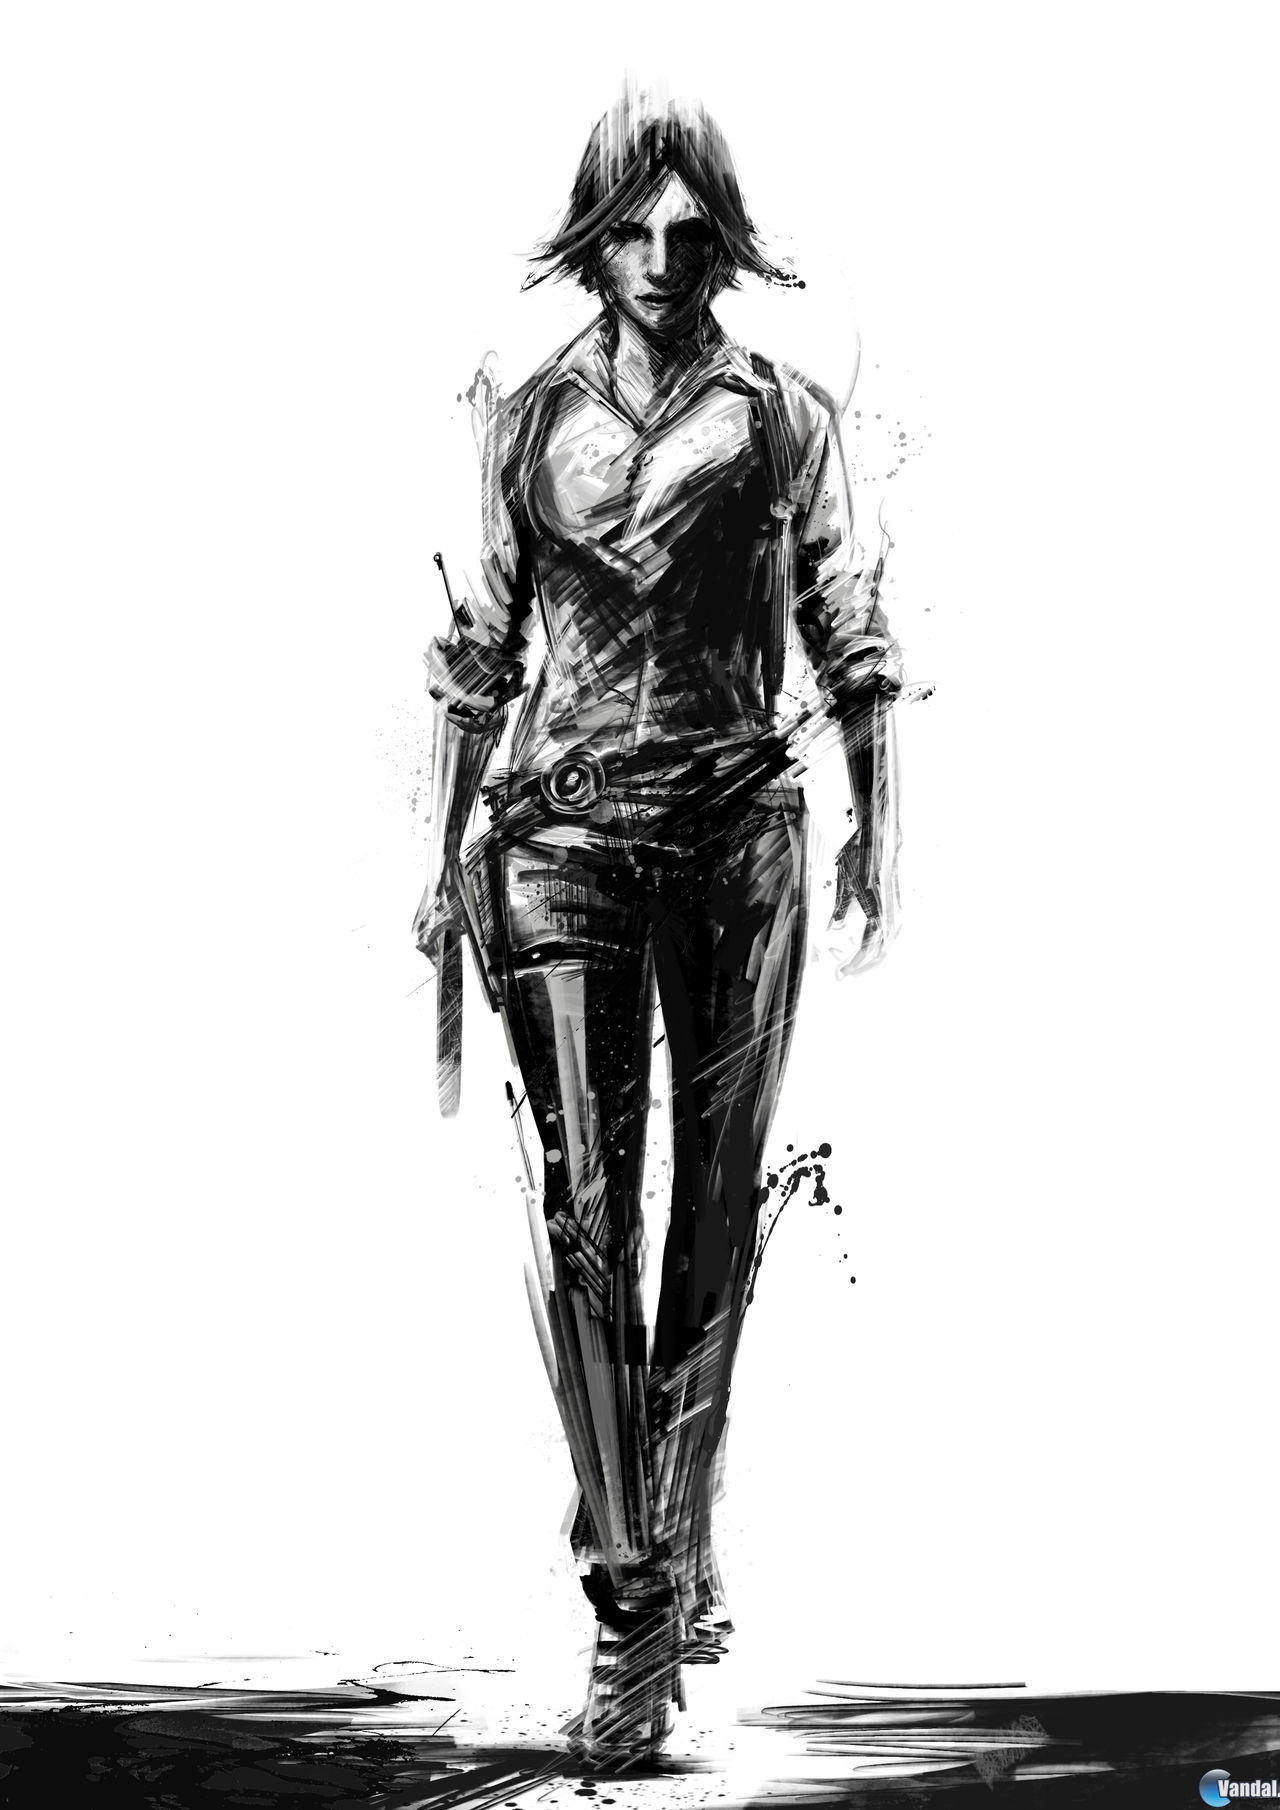 free download the evil within xbox one